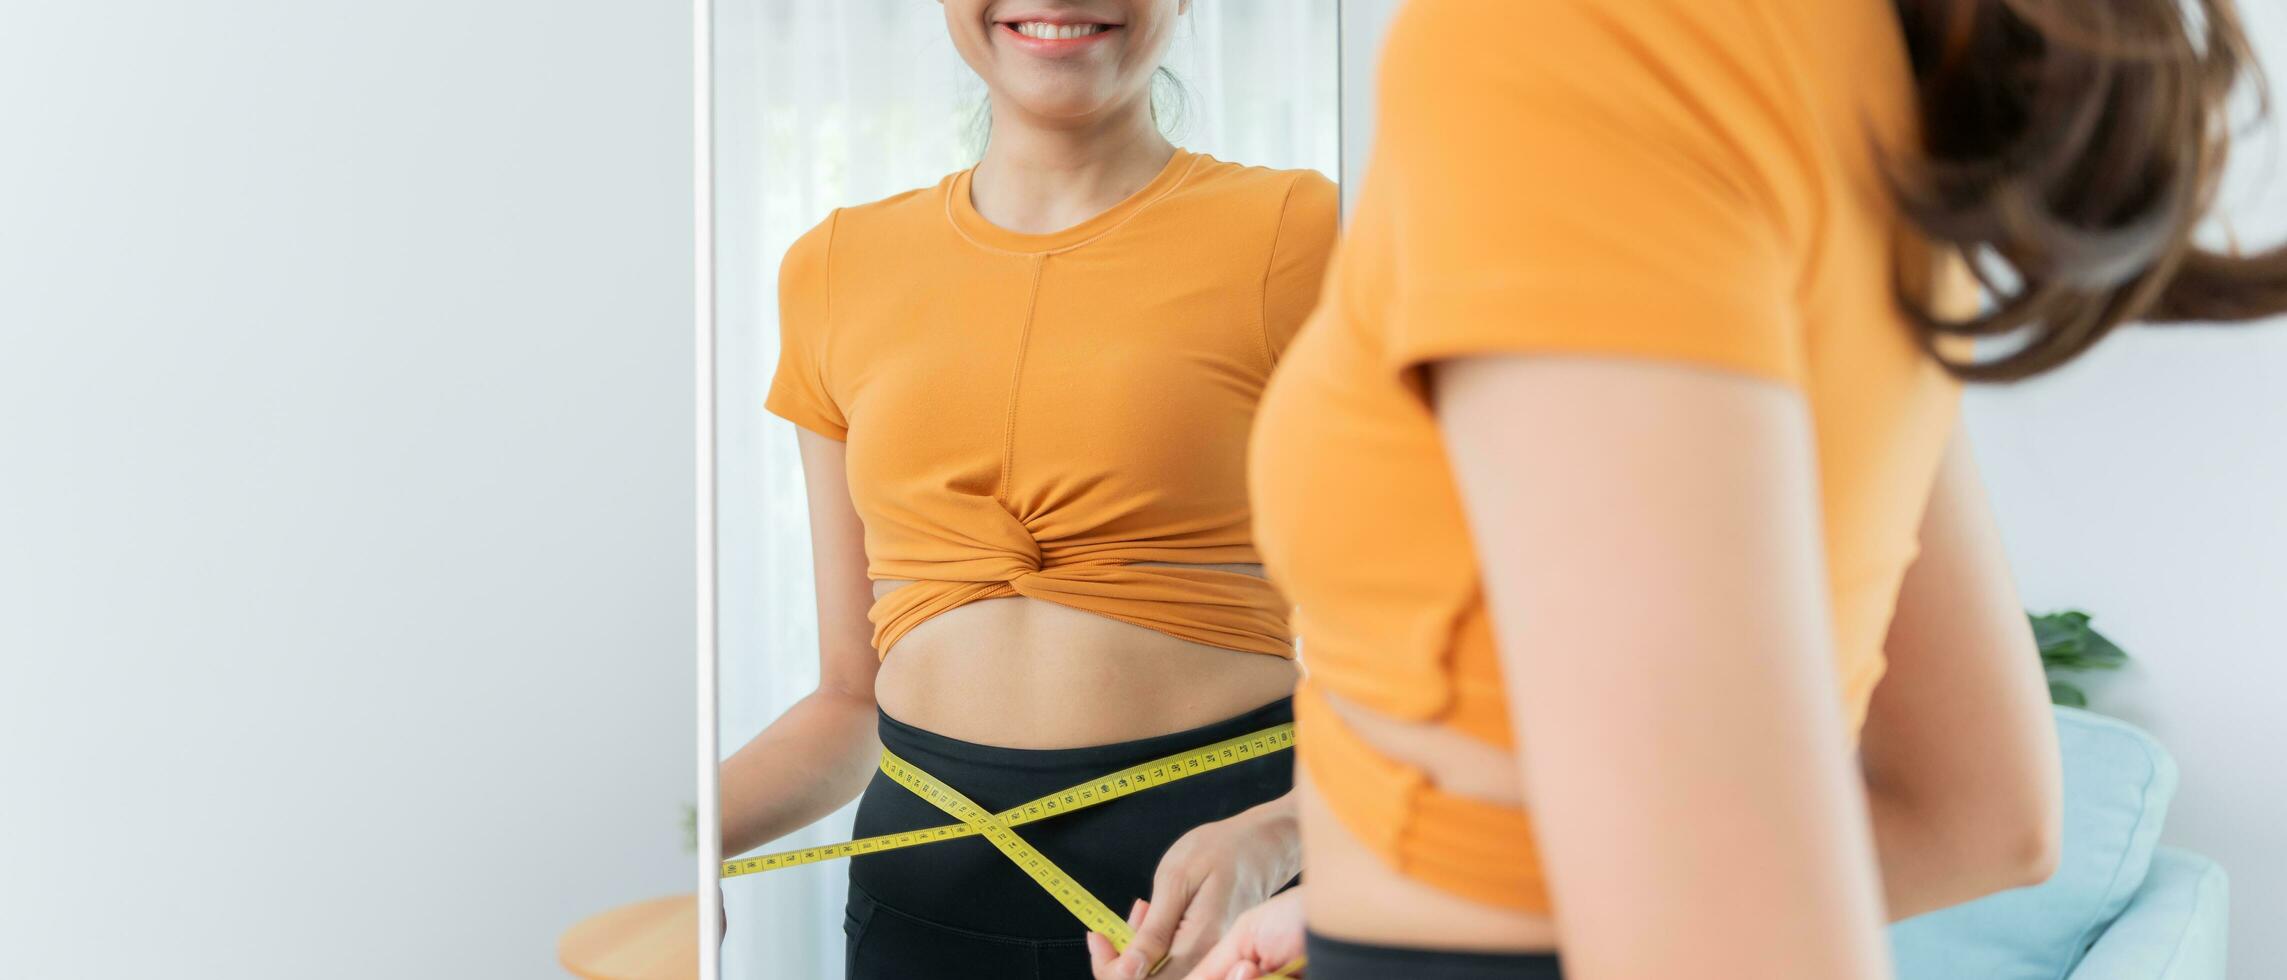 Diet and dieting. Beauty slim female body use tape measure. Woman in exercise clothes achieves weight loss goal for healthy life, crazy about thinness, thin waist, nutritionist. Fitness photo